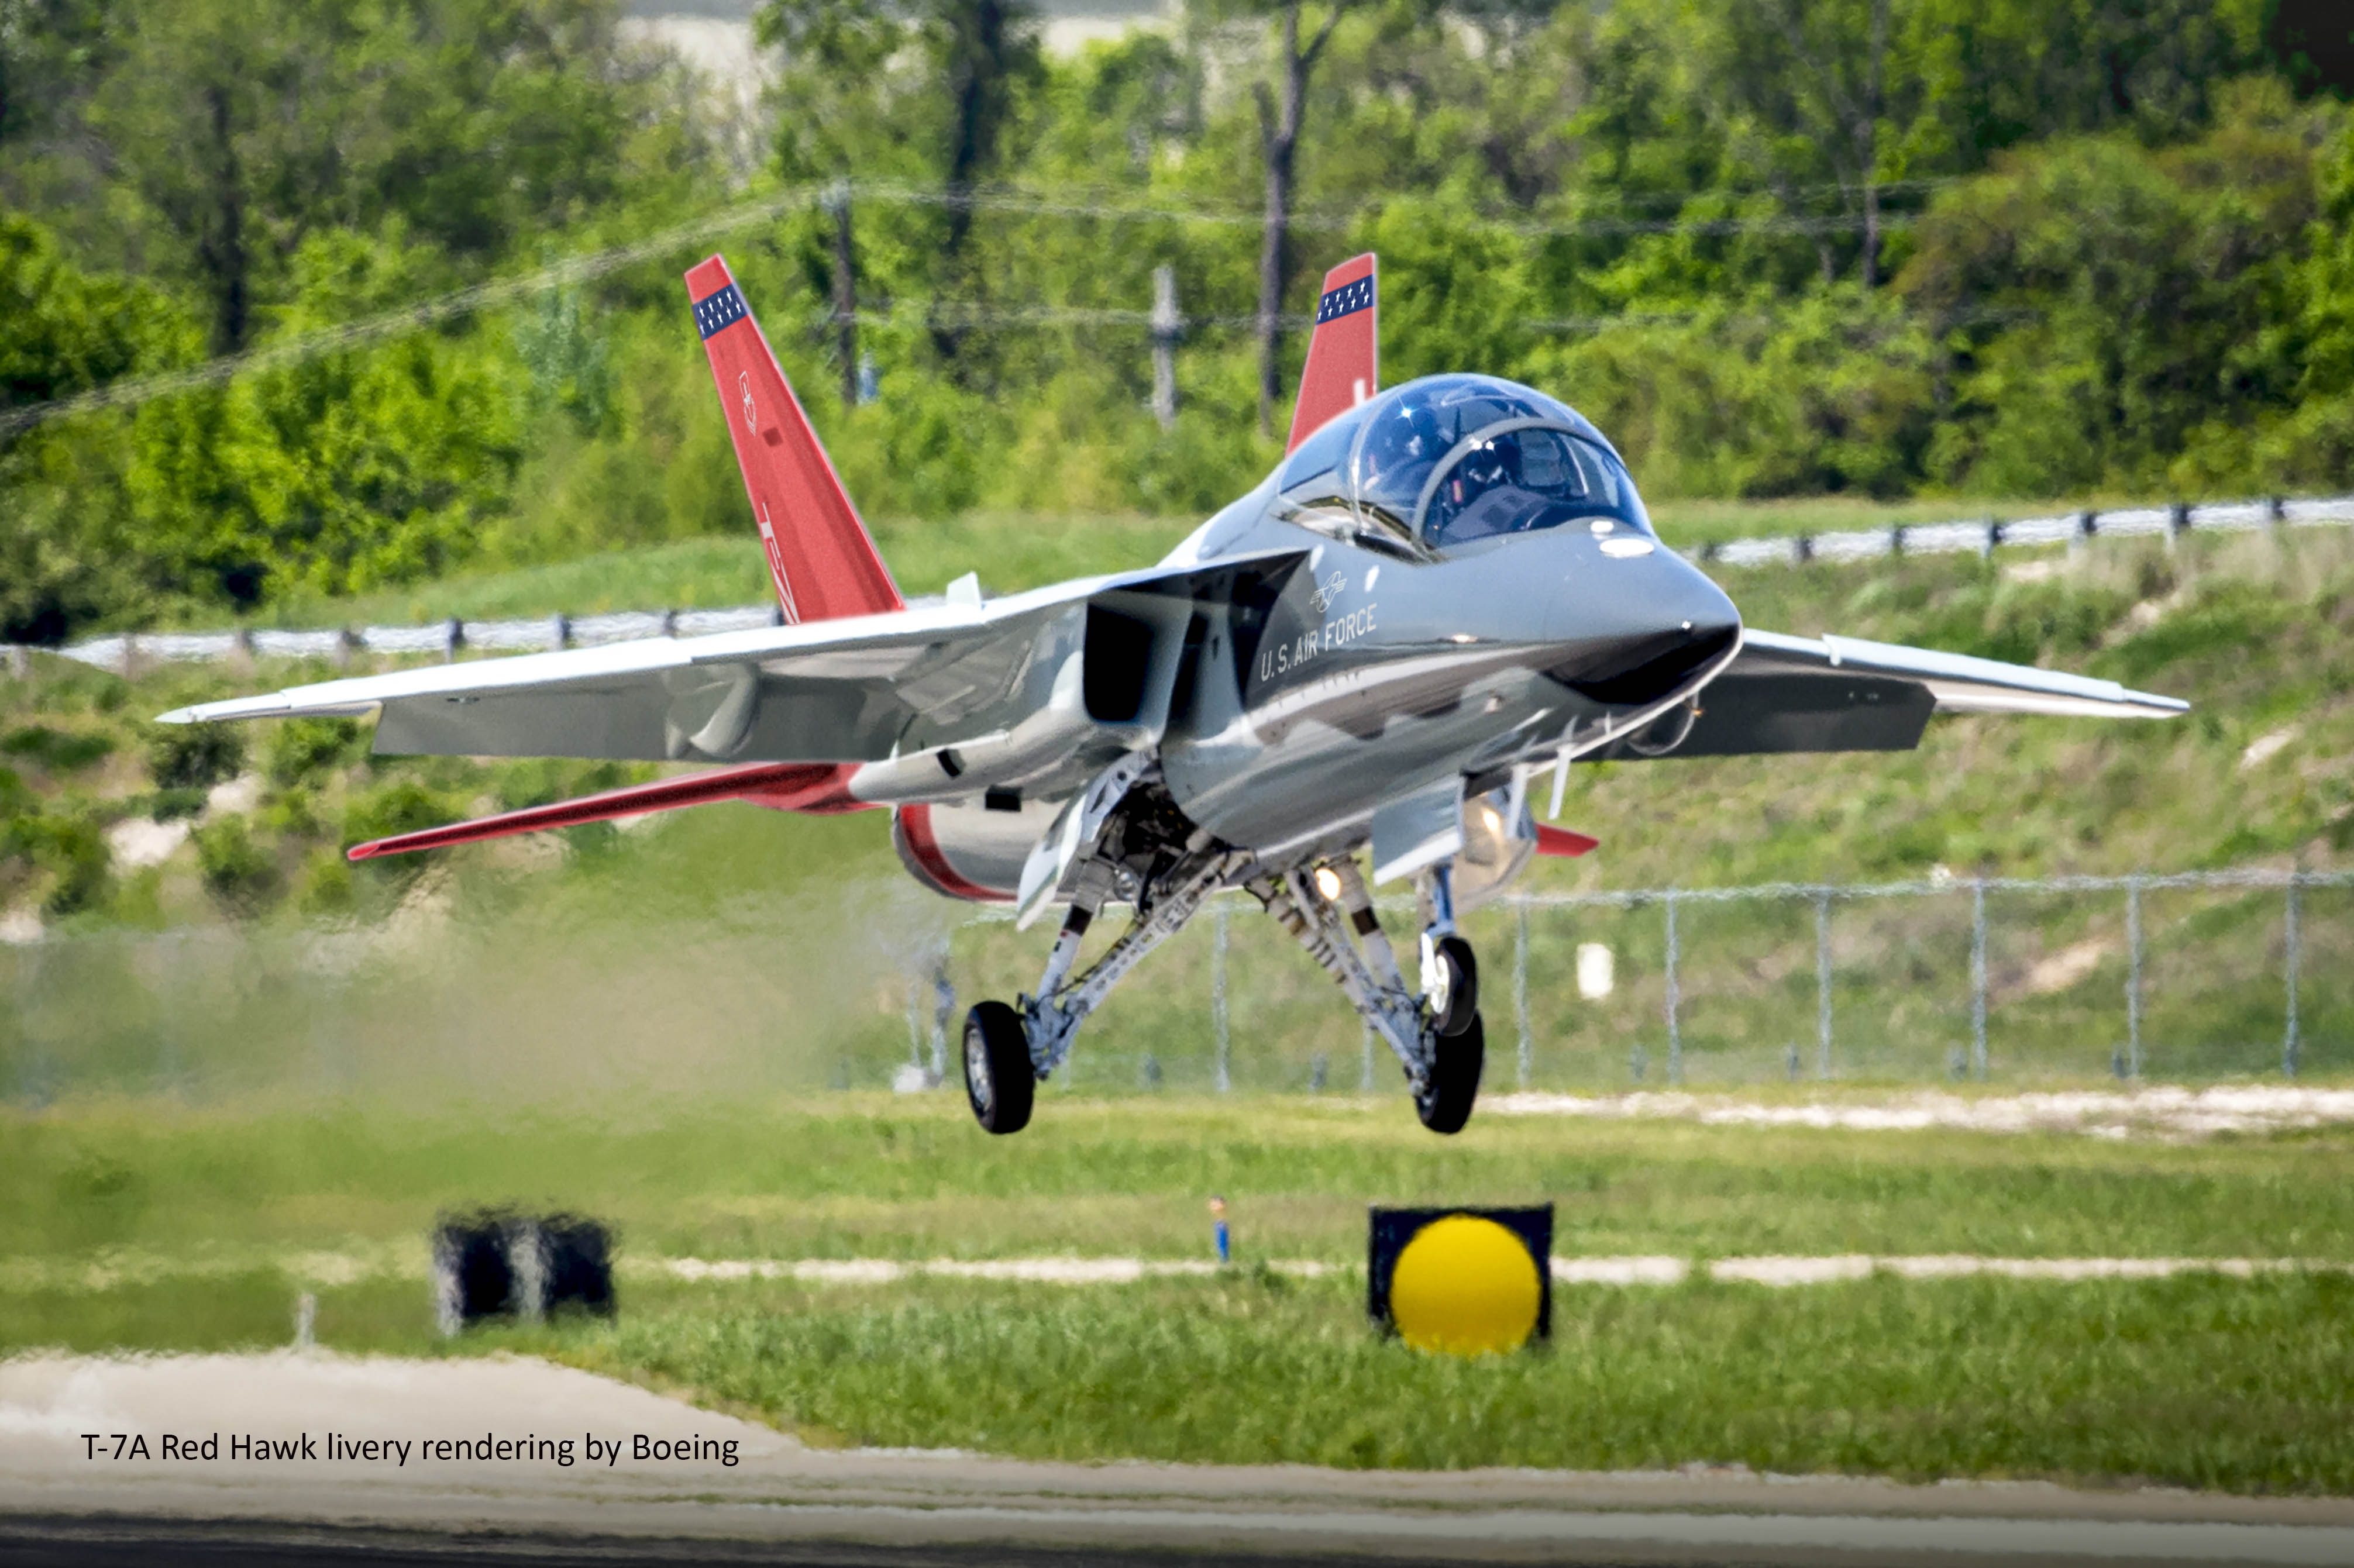 dynamatic-to-support-boeing-t-7a-red-hawk-indian-defence-industries